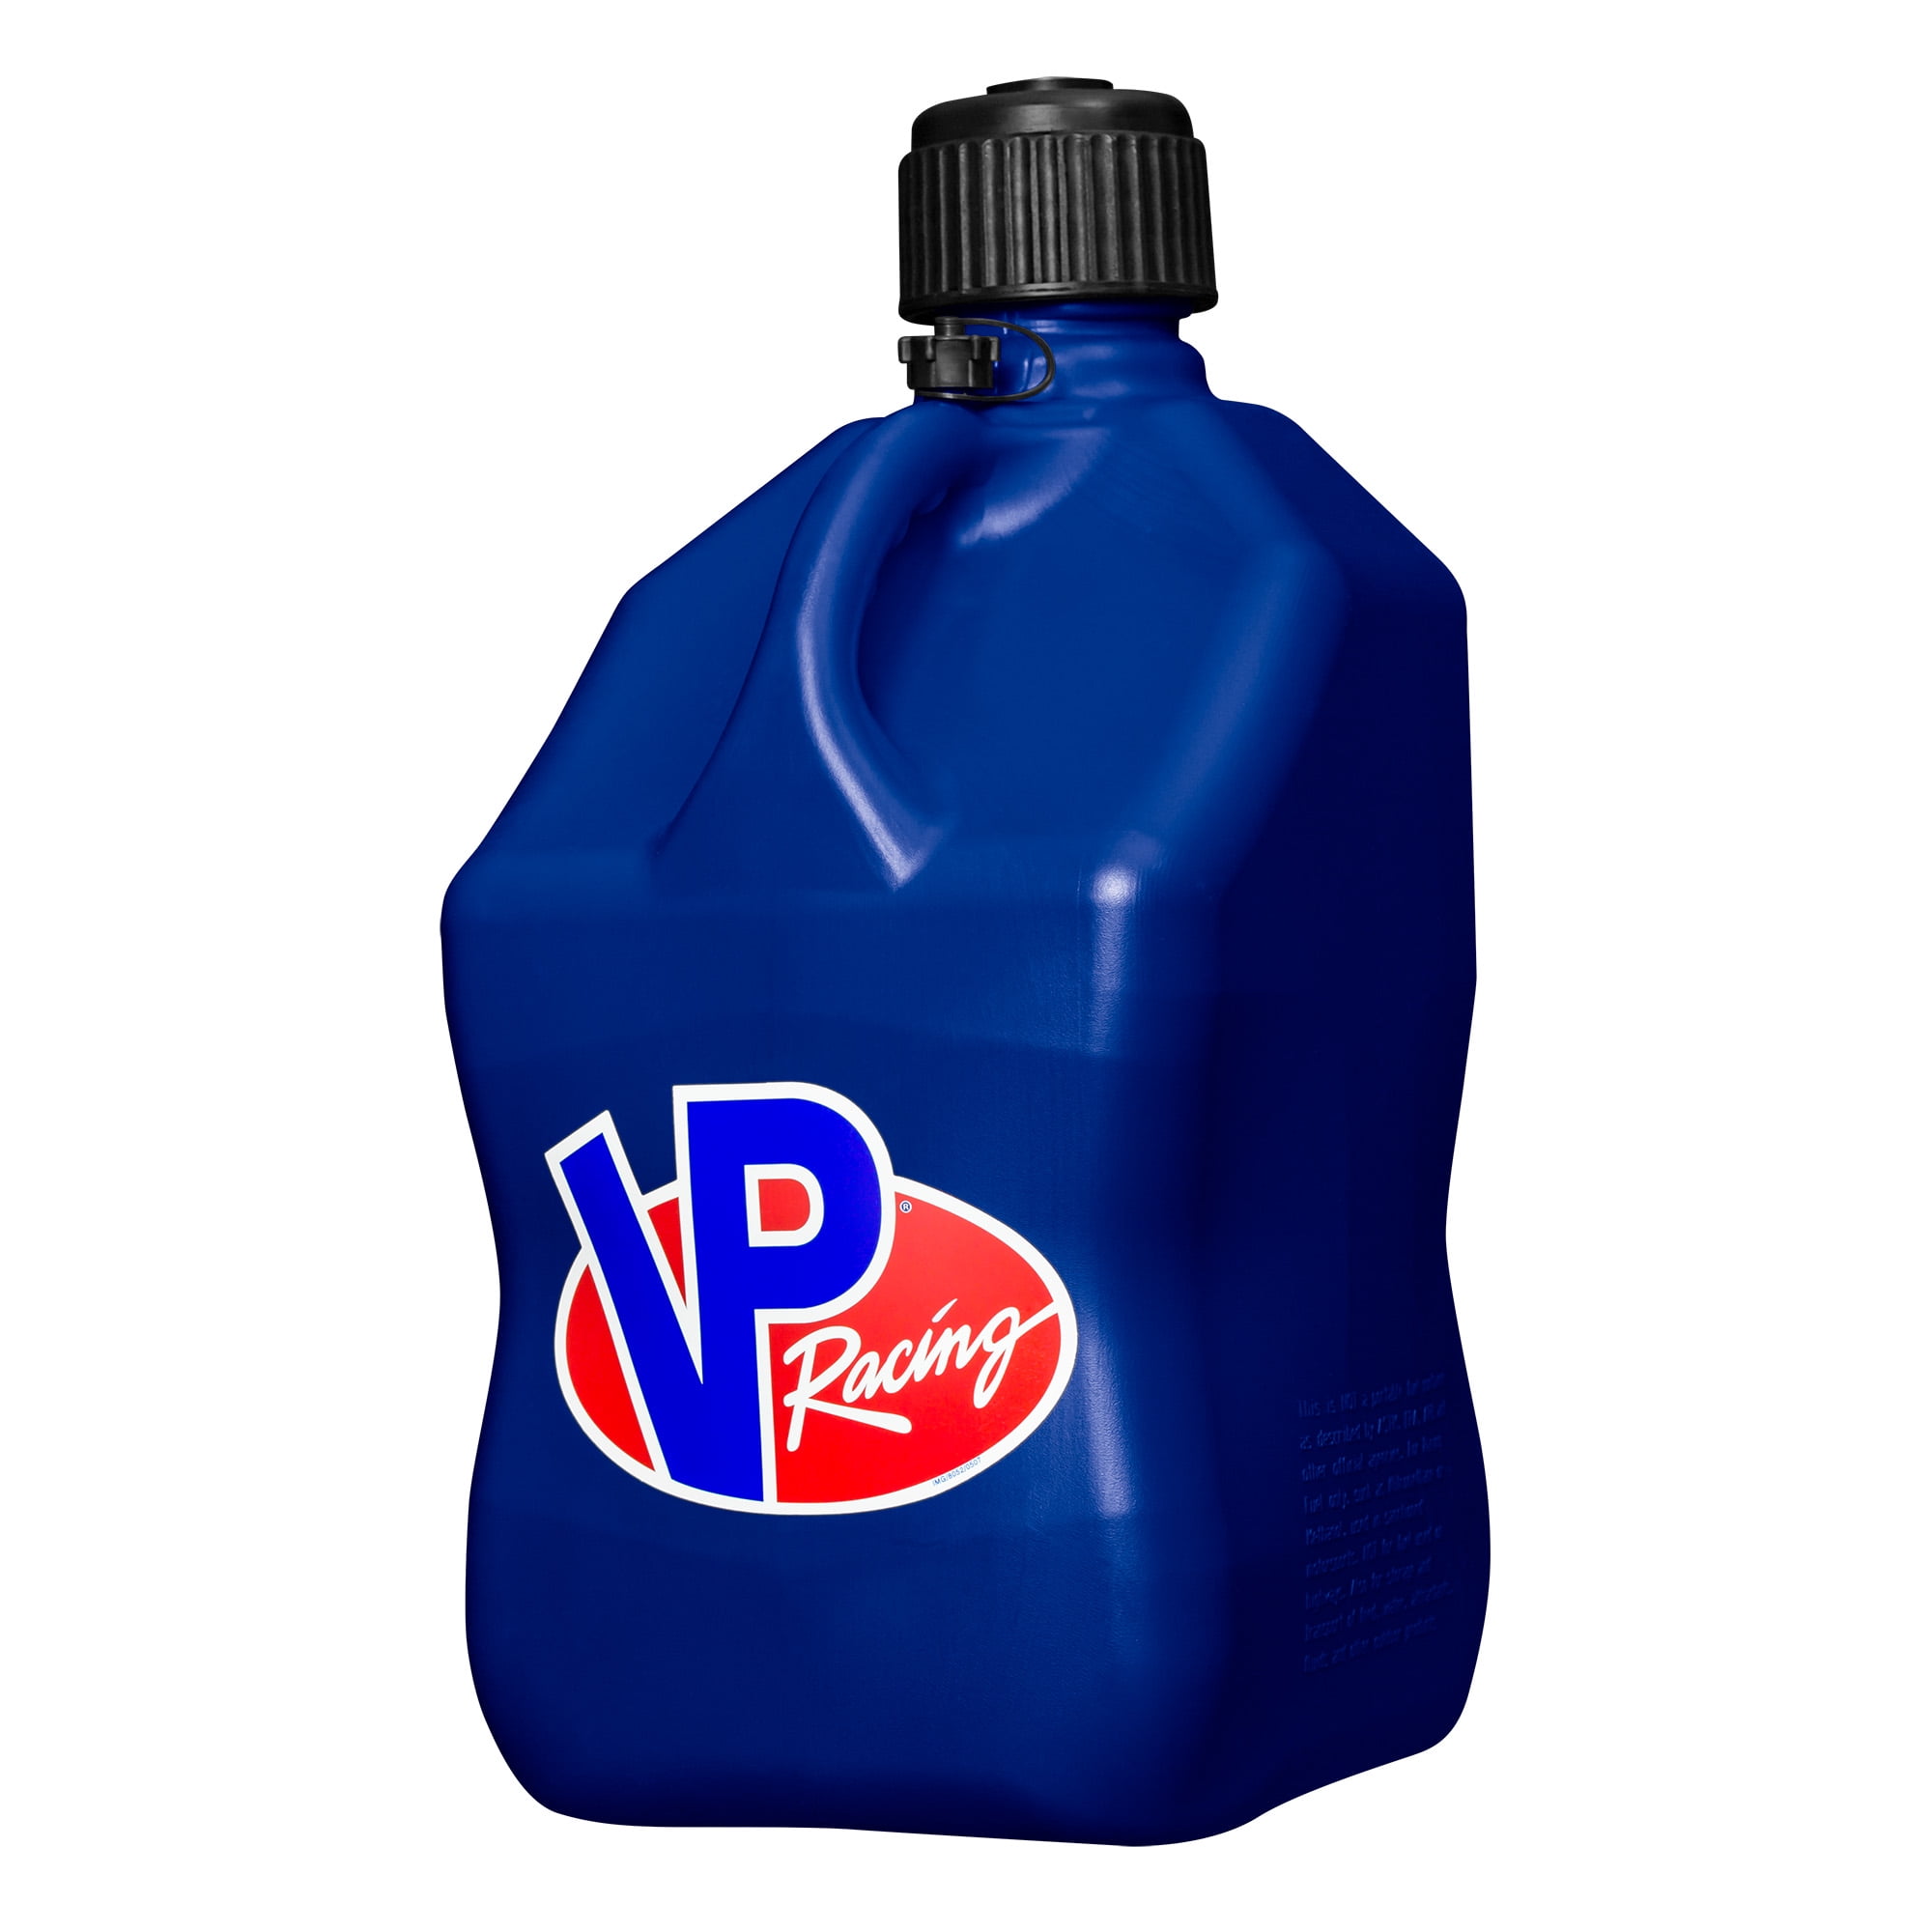 VP Racing Fuels Jug Storage 5-Gallon Container 2 Pack Blue & Hose 2 Pack